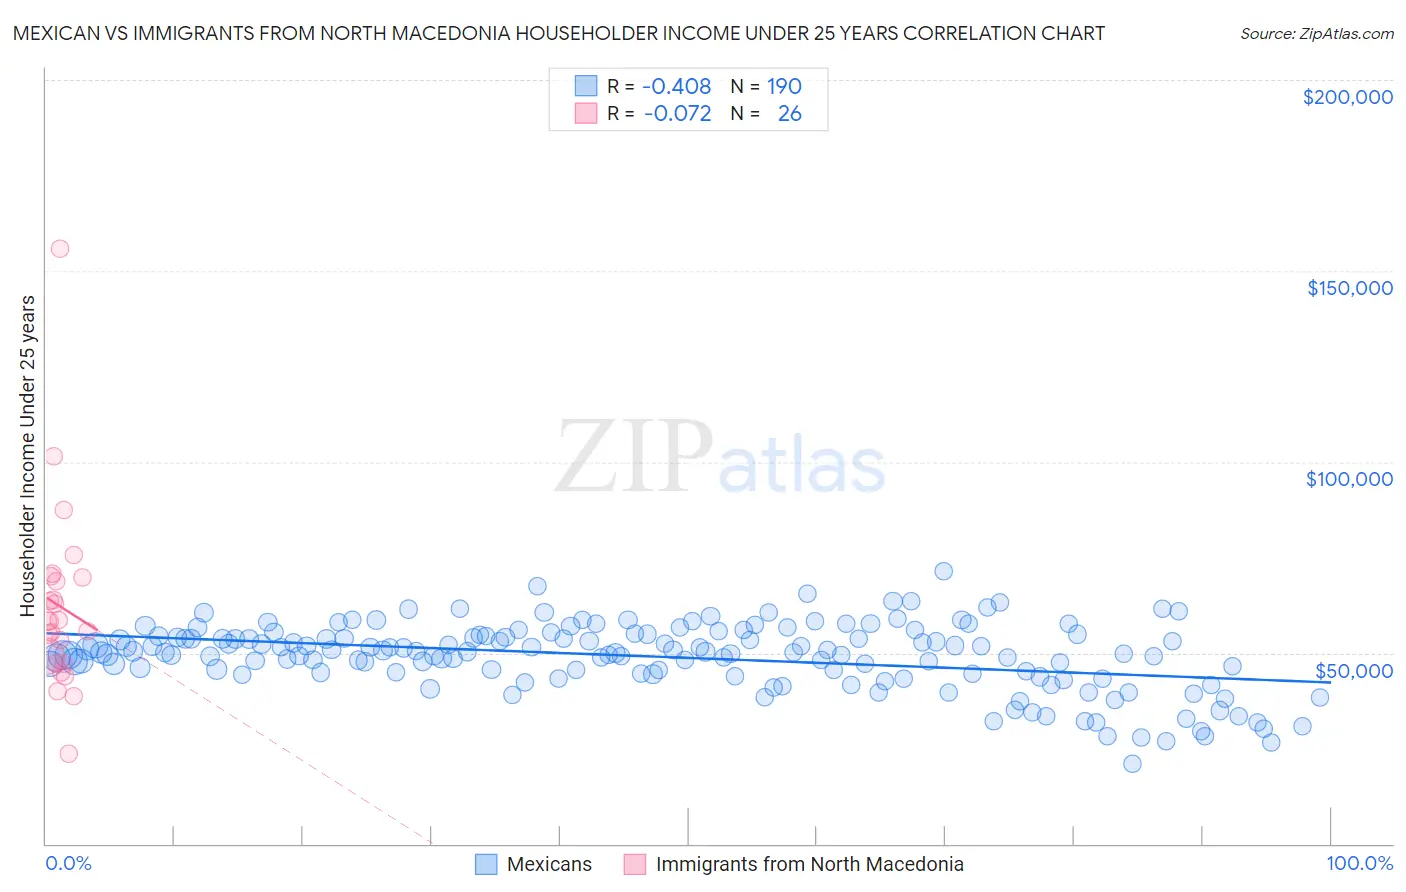 Mexican vs Immigrants from North Macedonia Householder Income Under 25 years